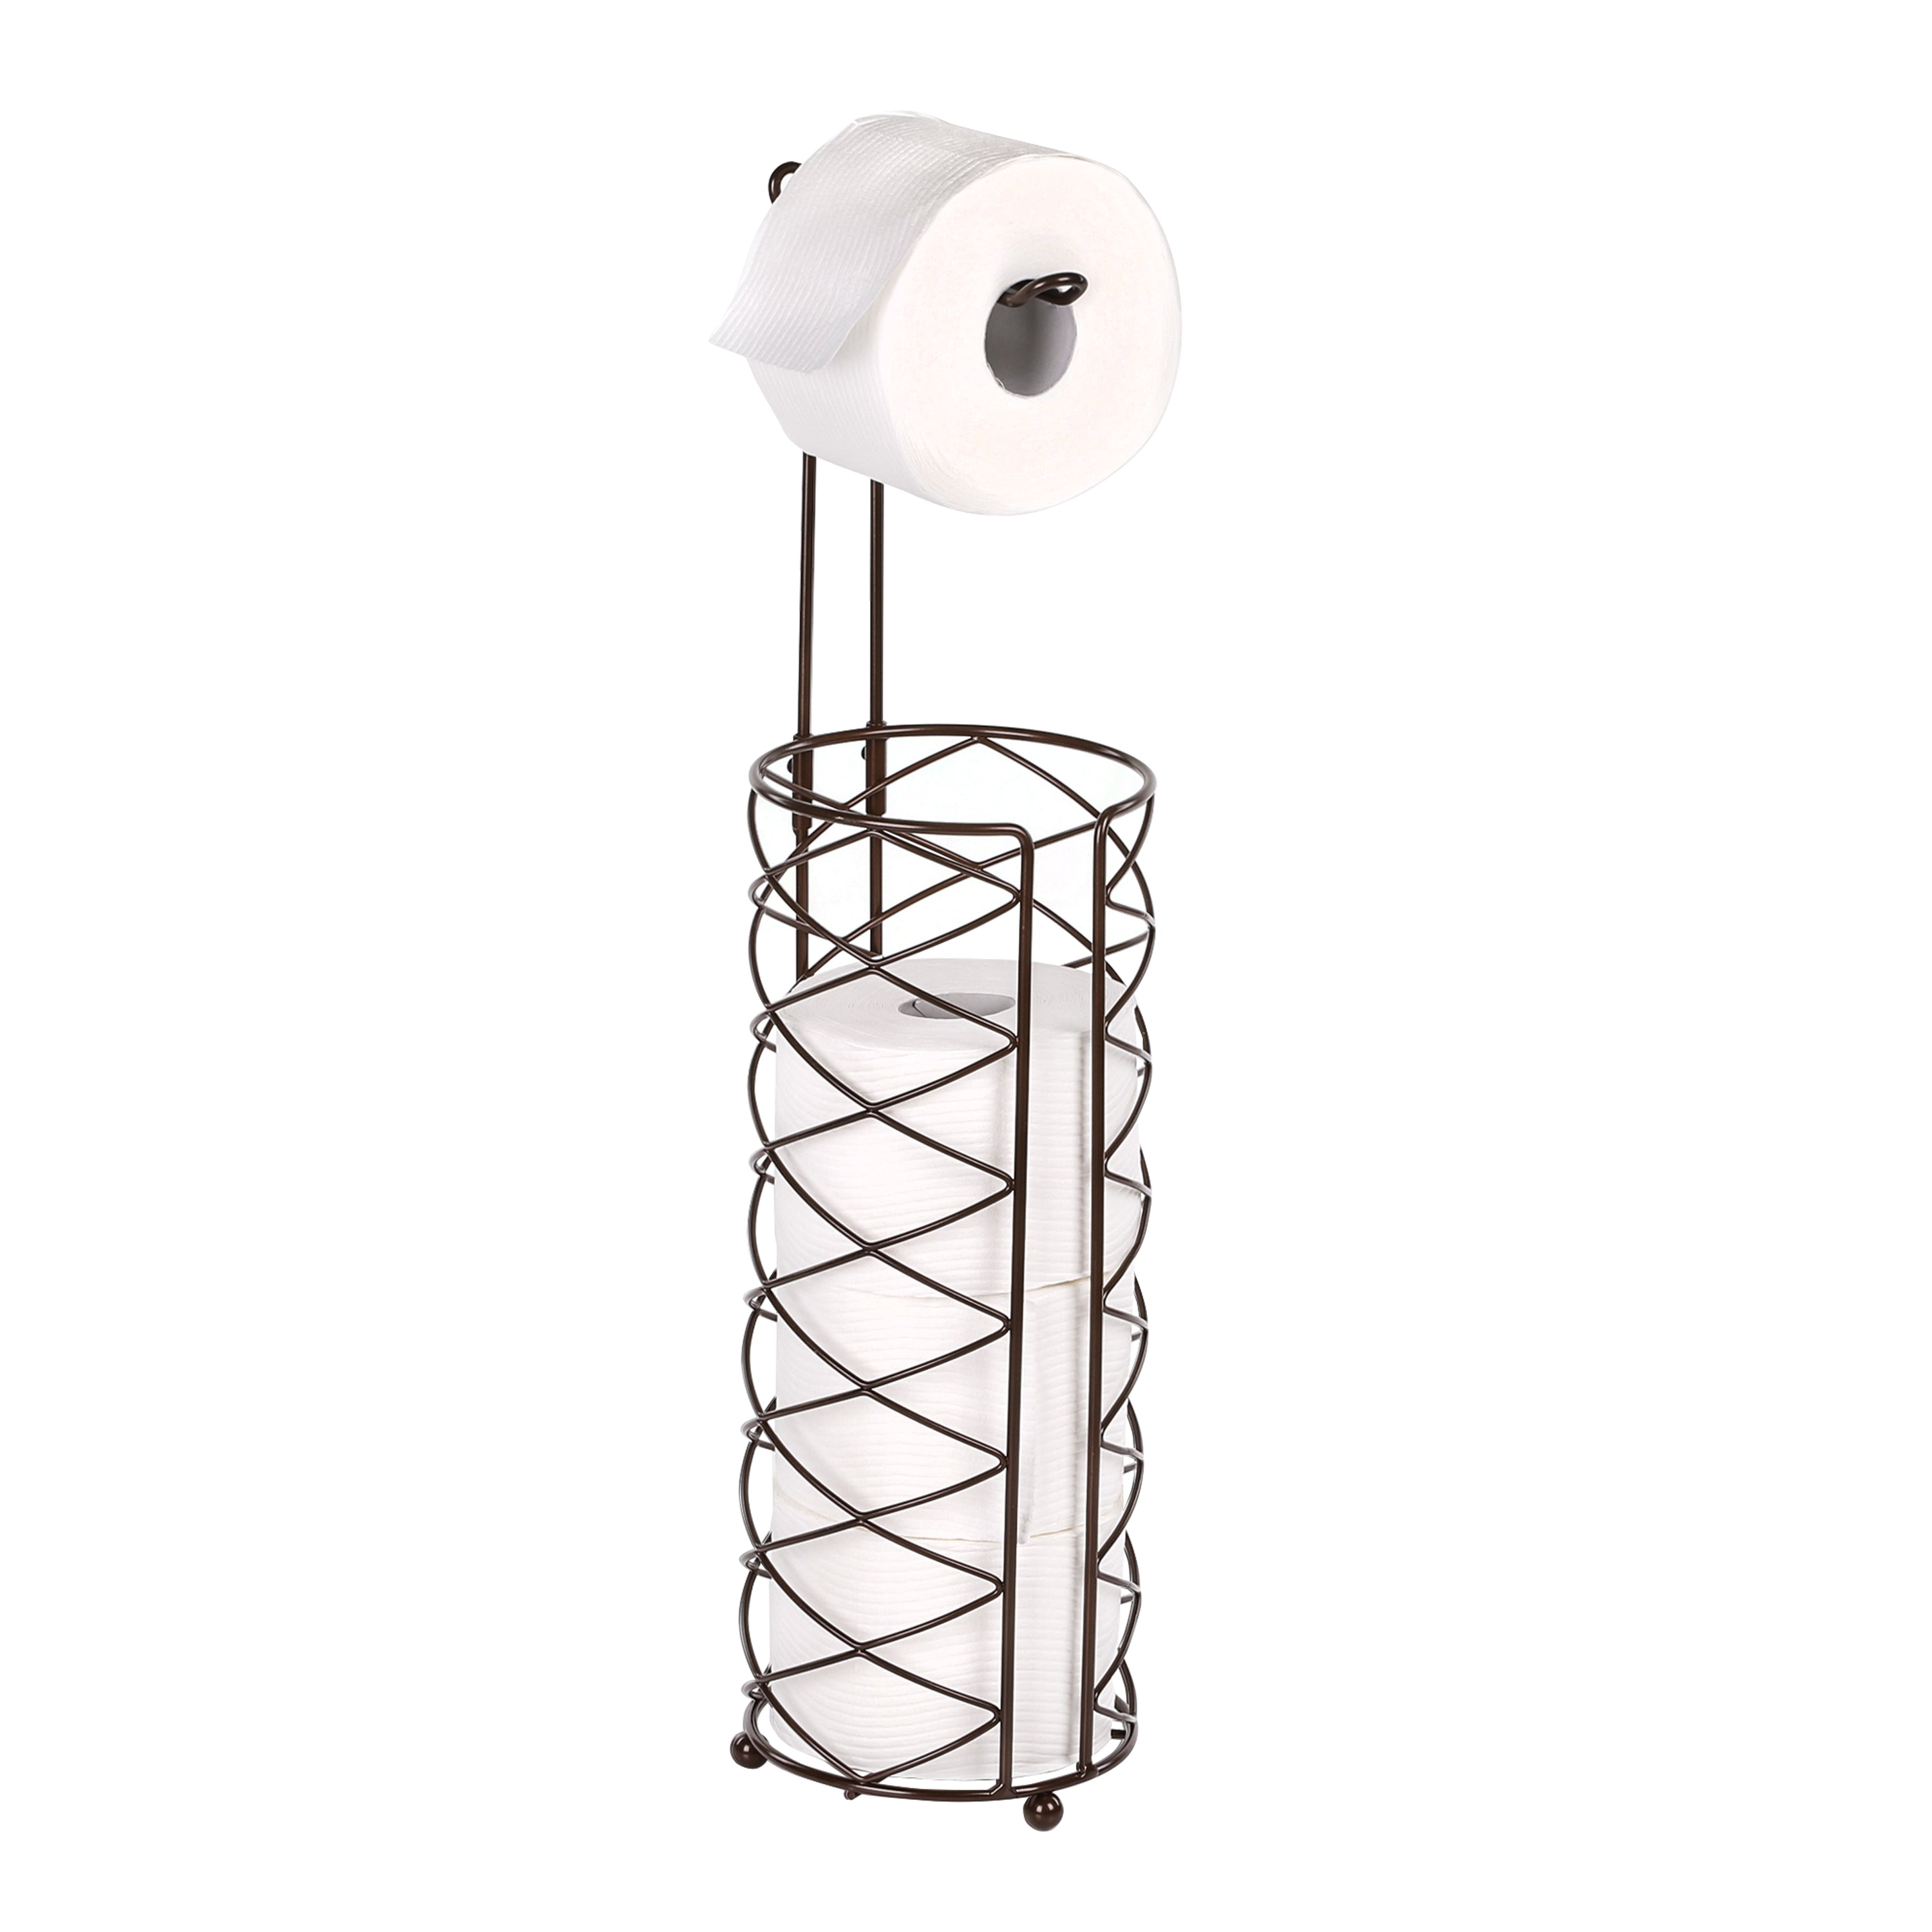 Toilet Paper Holder Stand And Tissue Paper Roll Dispenser For 4